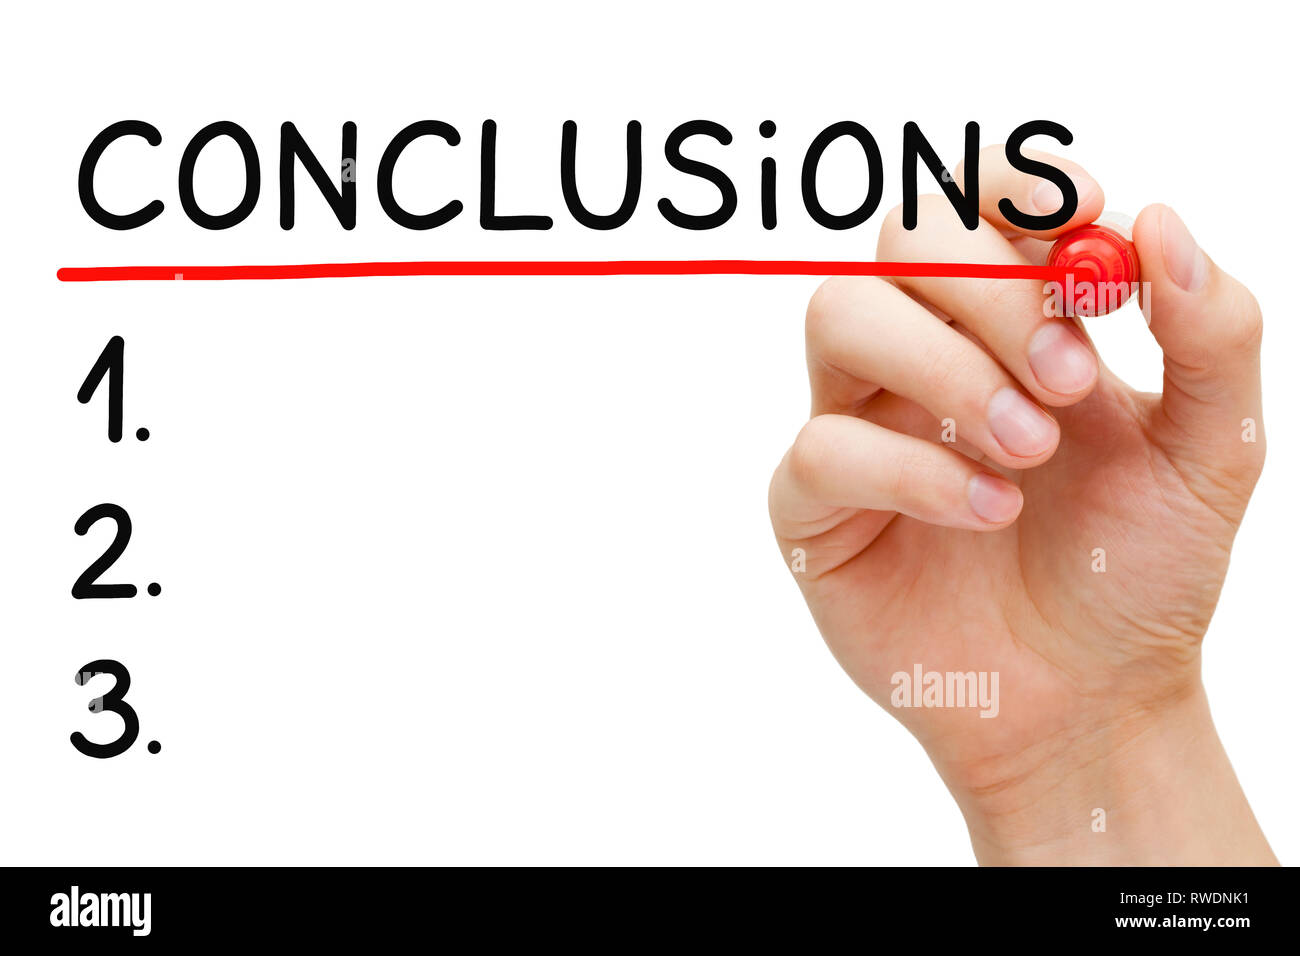 Hand underlining the word Conclusions in blank list concept with red marker isolated on white. Stock Photo